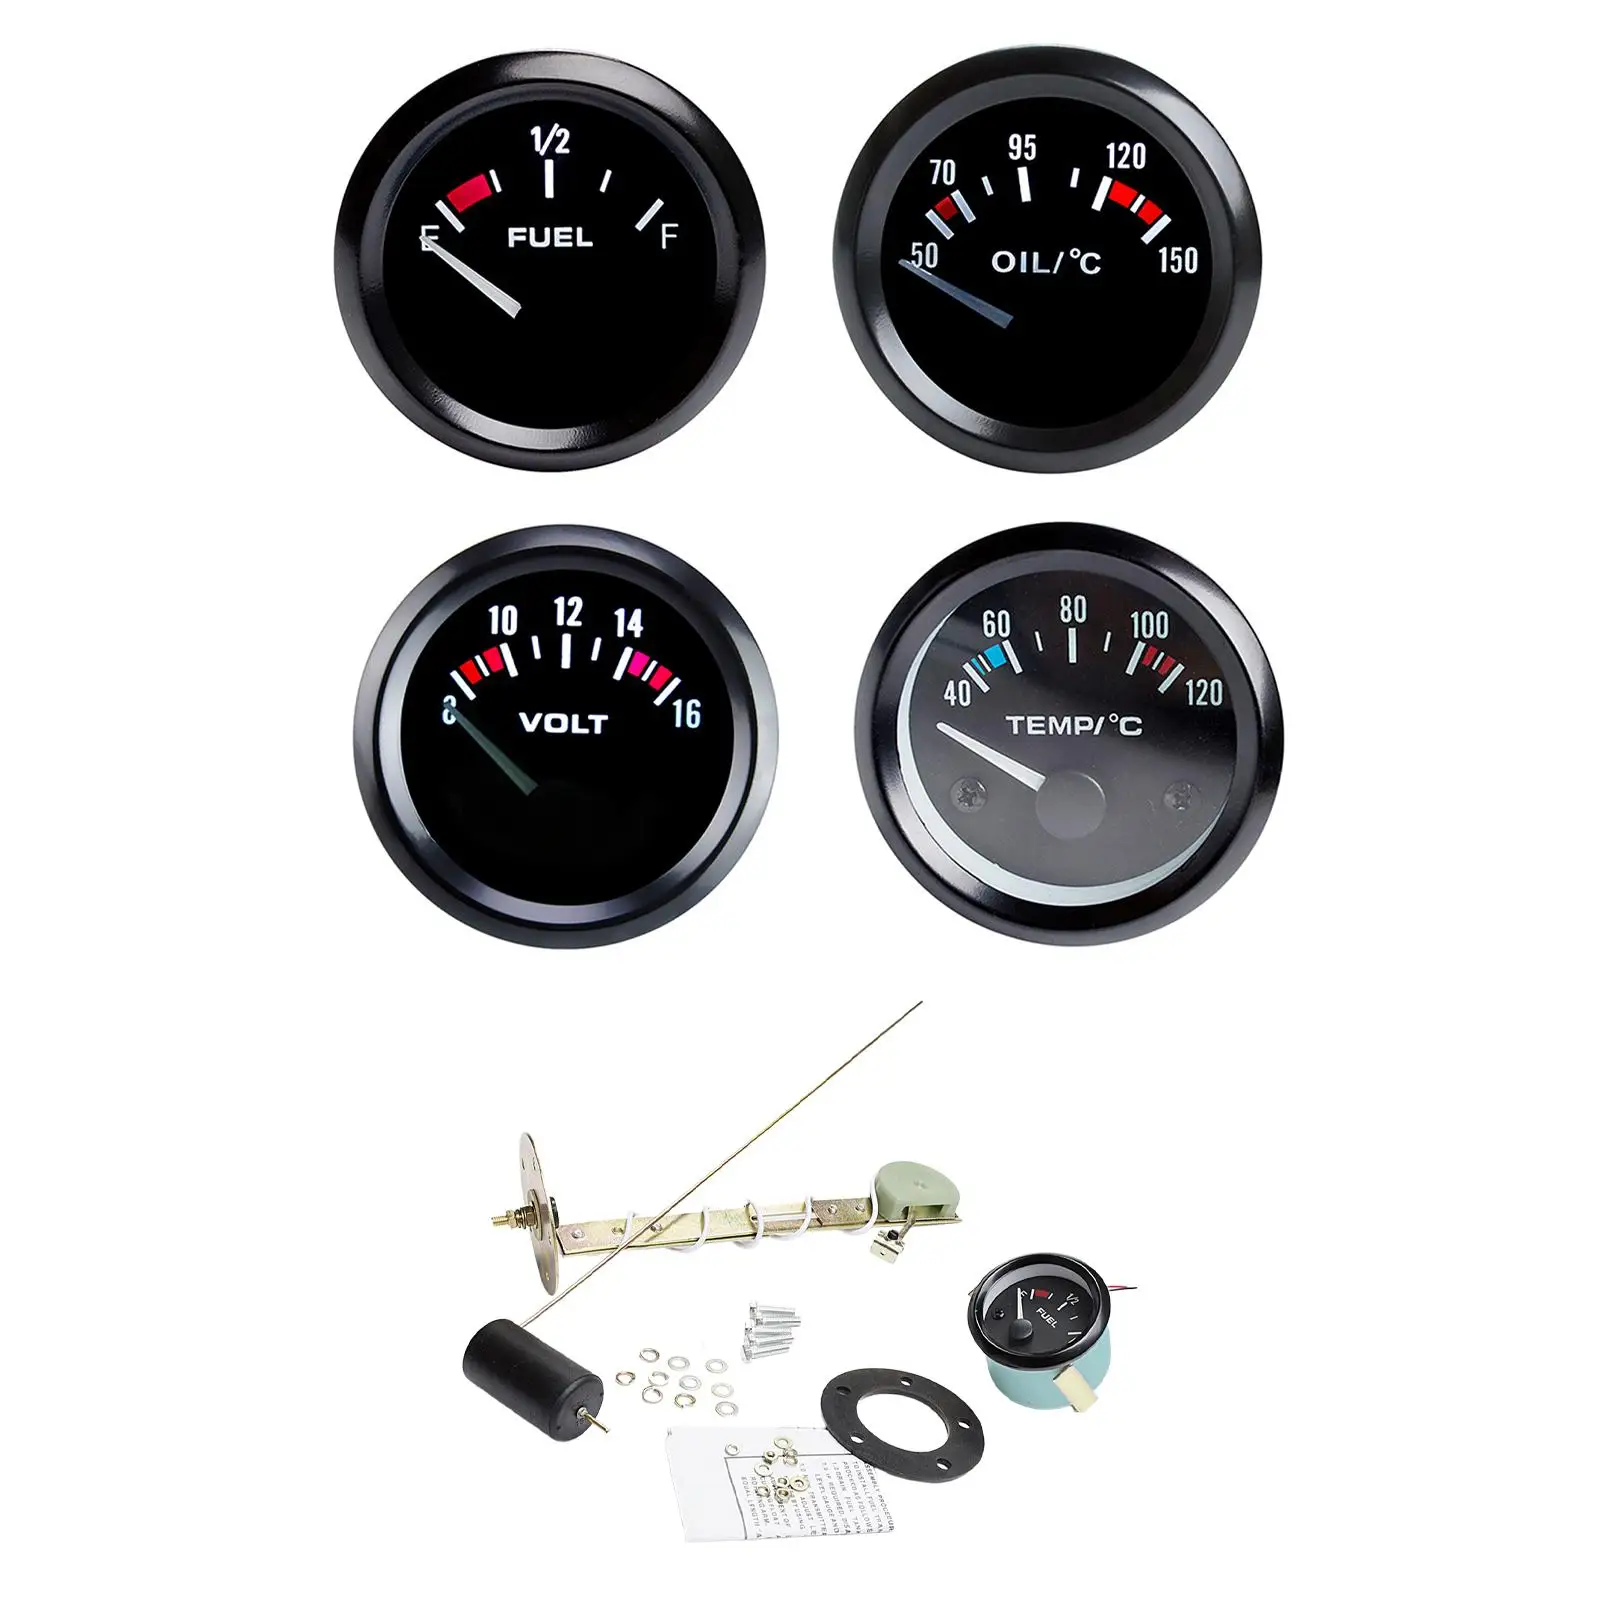 Car Fuel Gauge Adjustable LED Display Racing Instrument Panel 52mm 2 inch for Replaces Premium Car Accessories Spare Parts